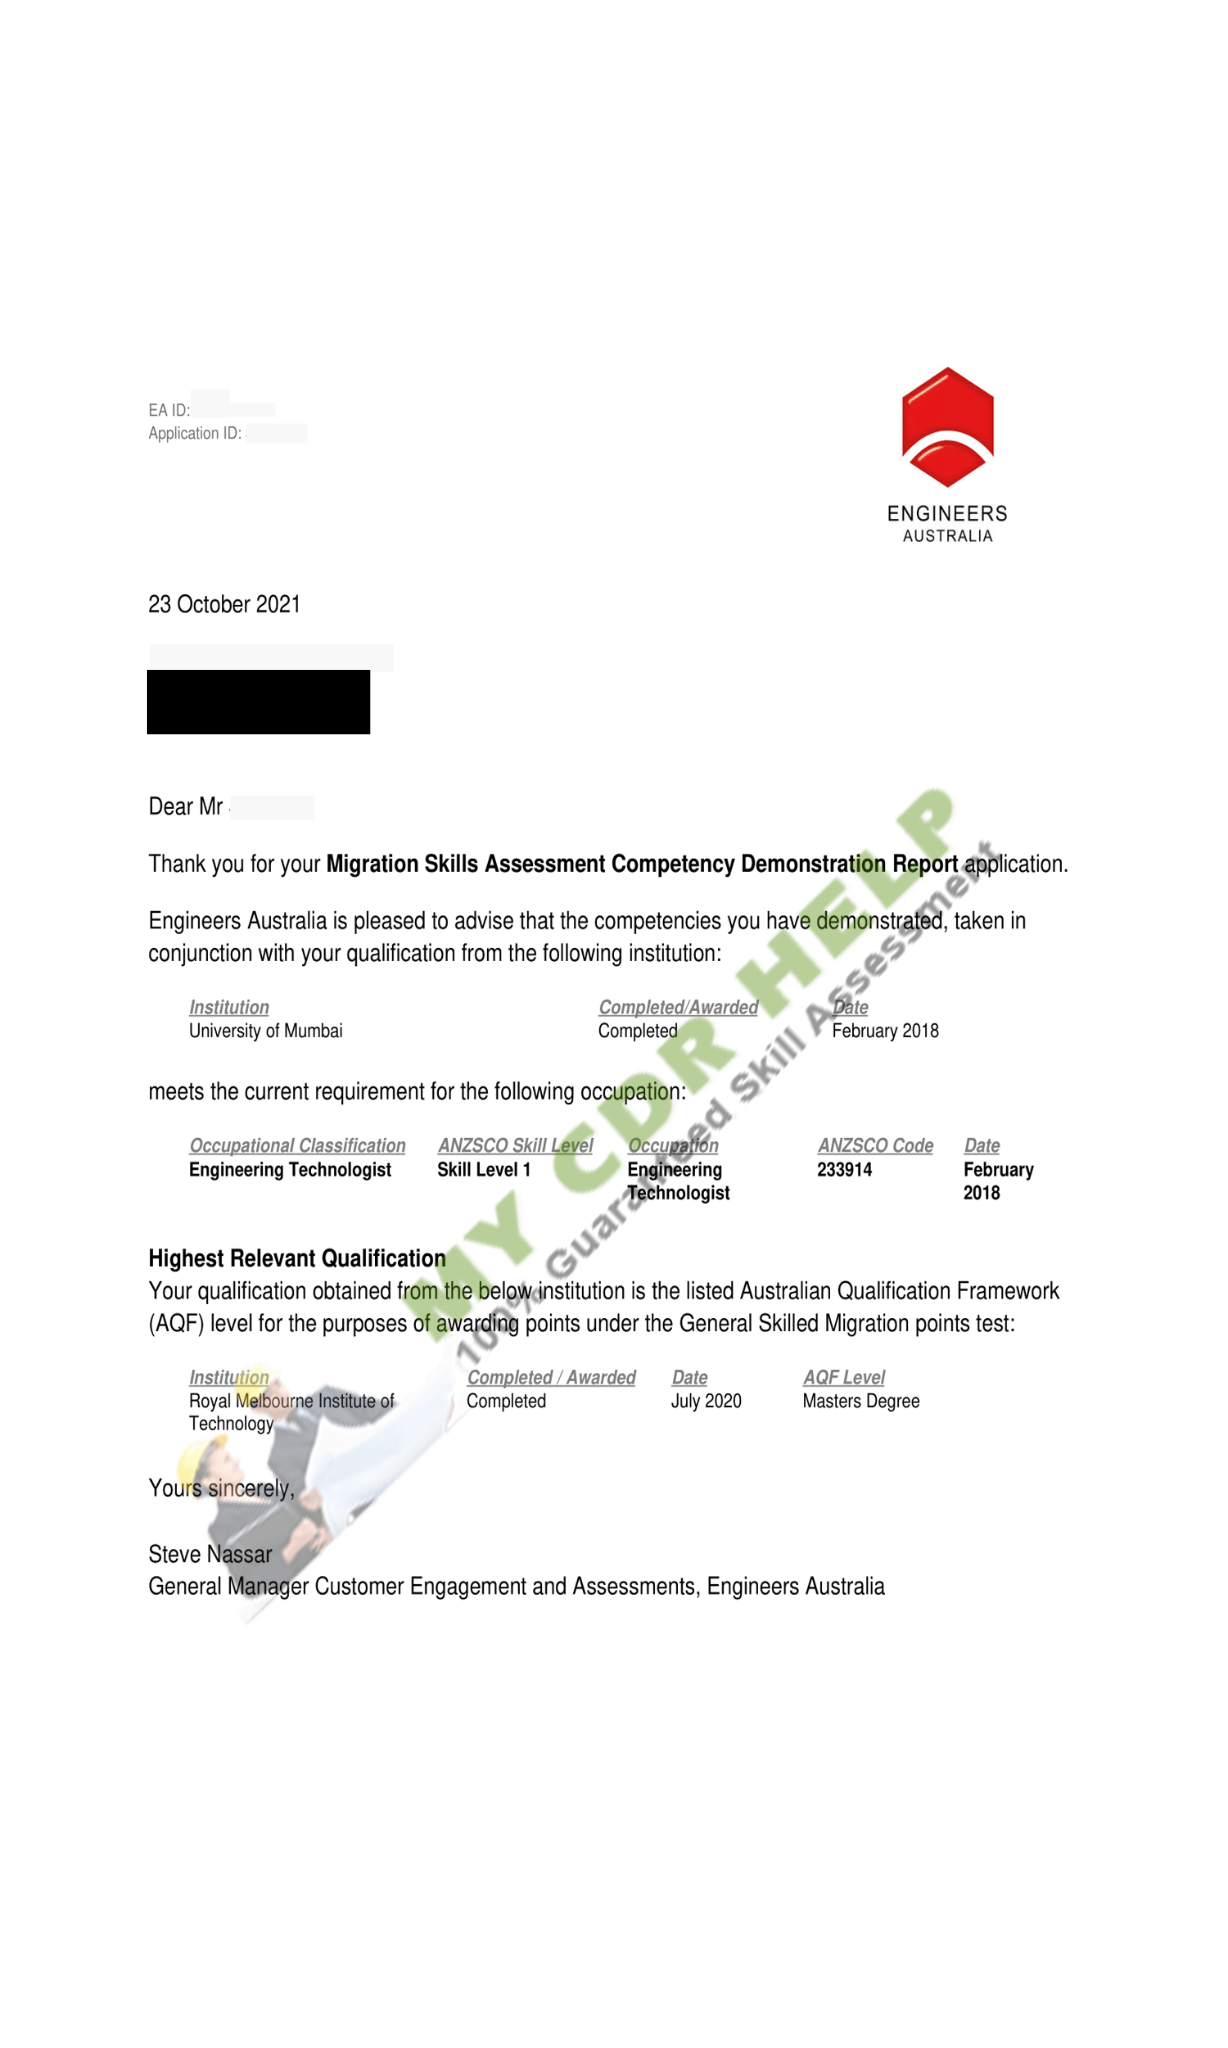 MSA CDR Approval Letter Oct 2021